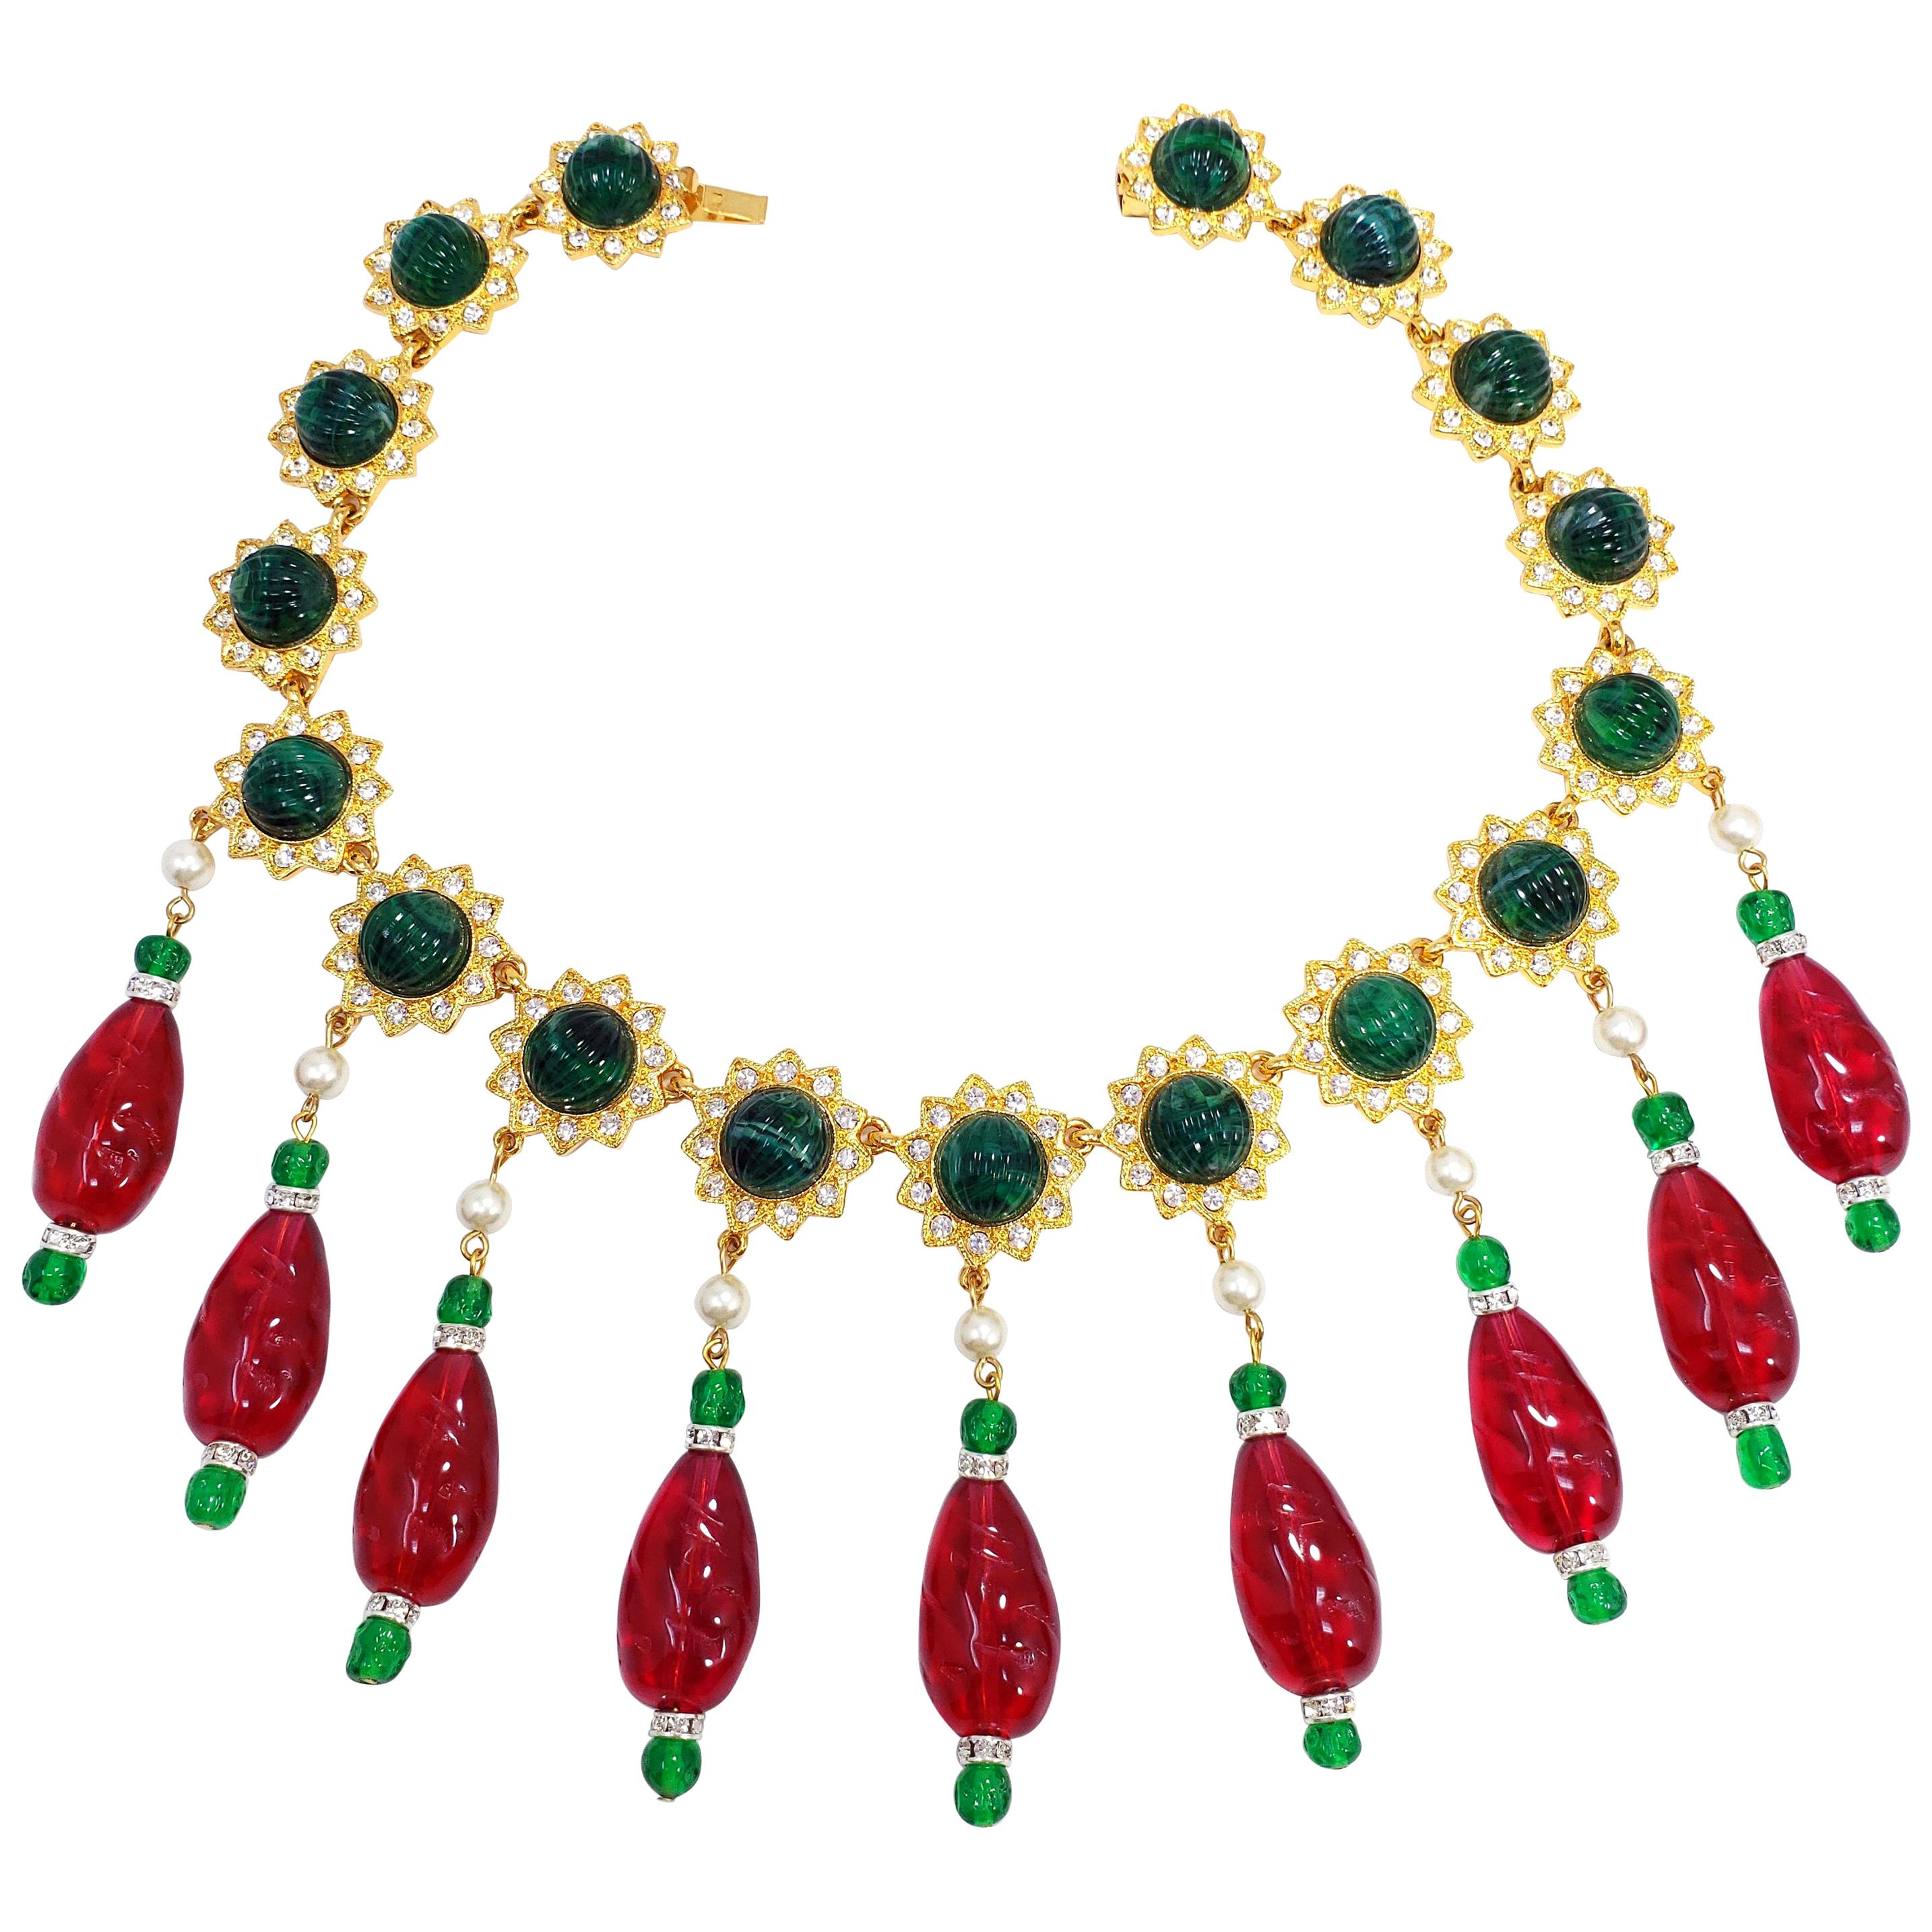 KJL Kenneth Jay Lane Red and Green Drop Accents Necklace w Faux Pearls, Crystals